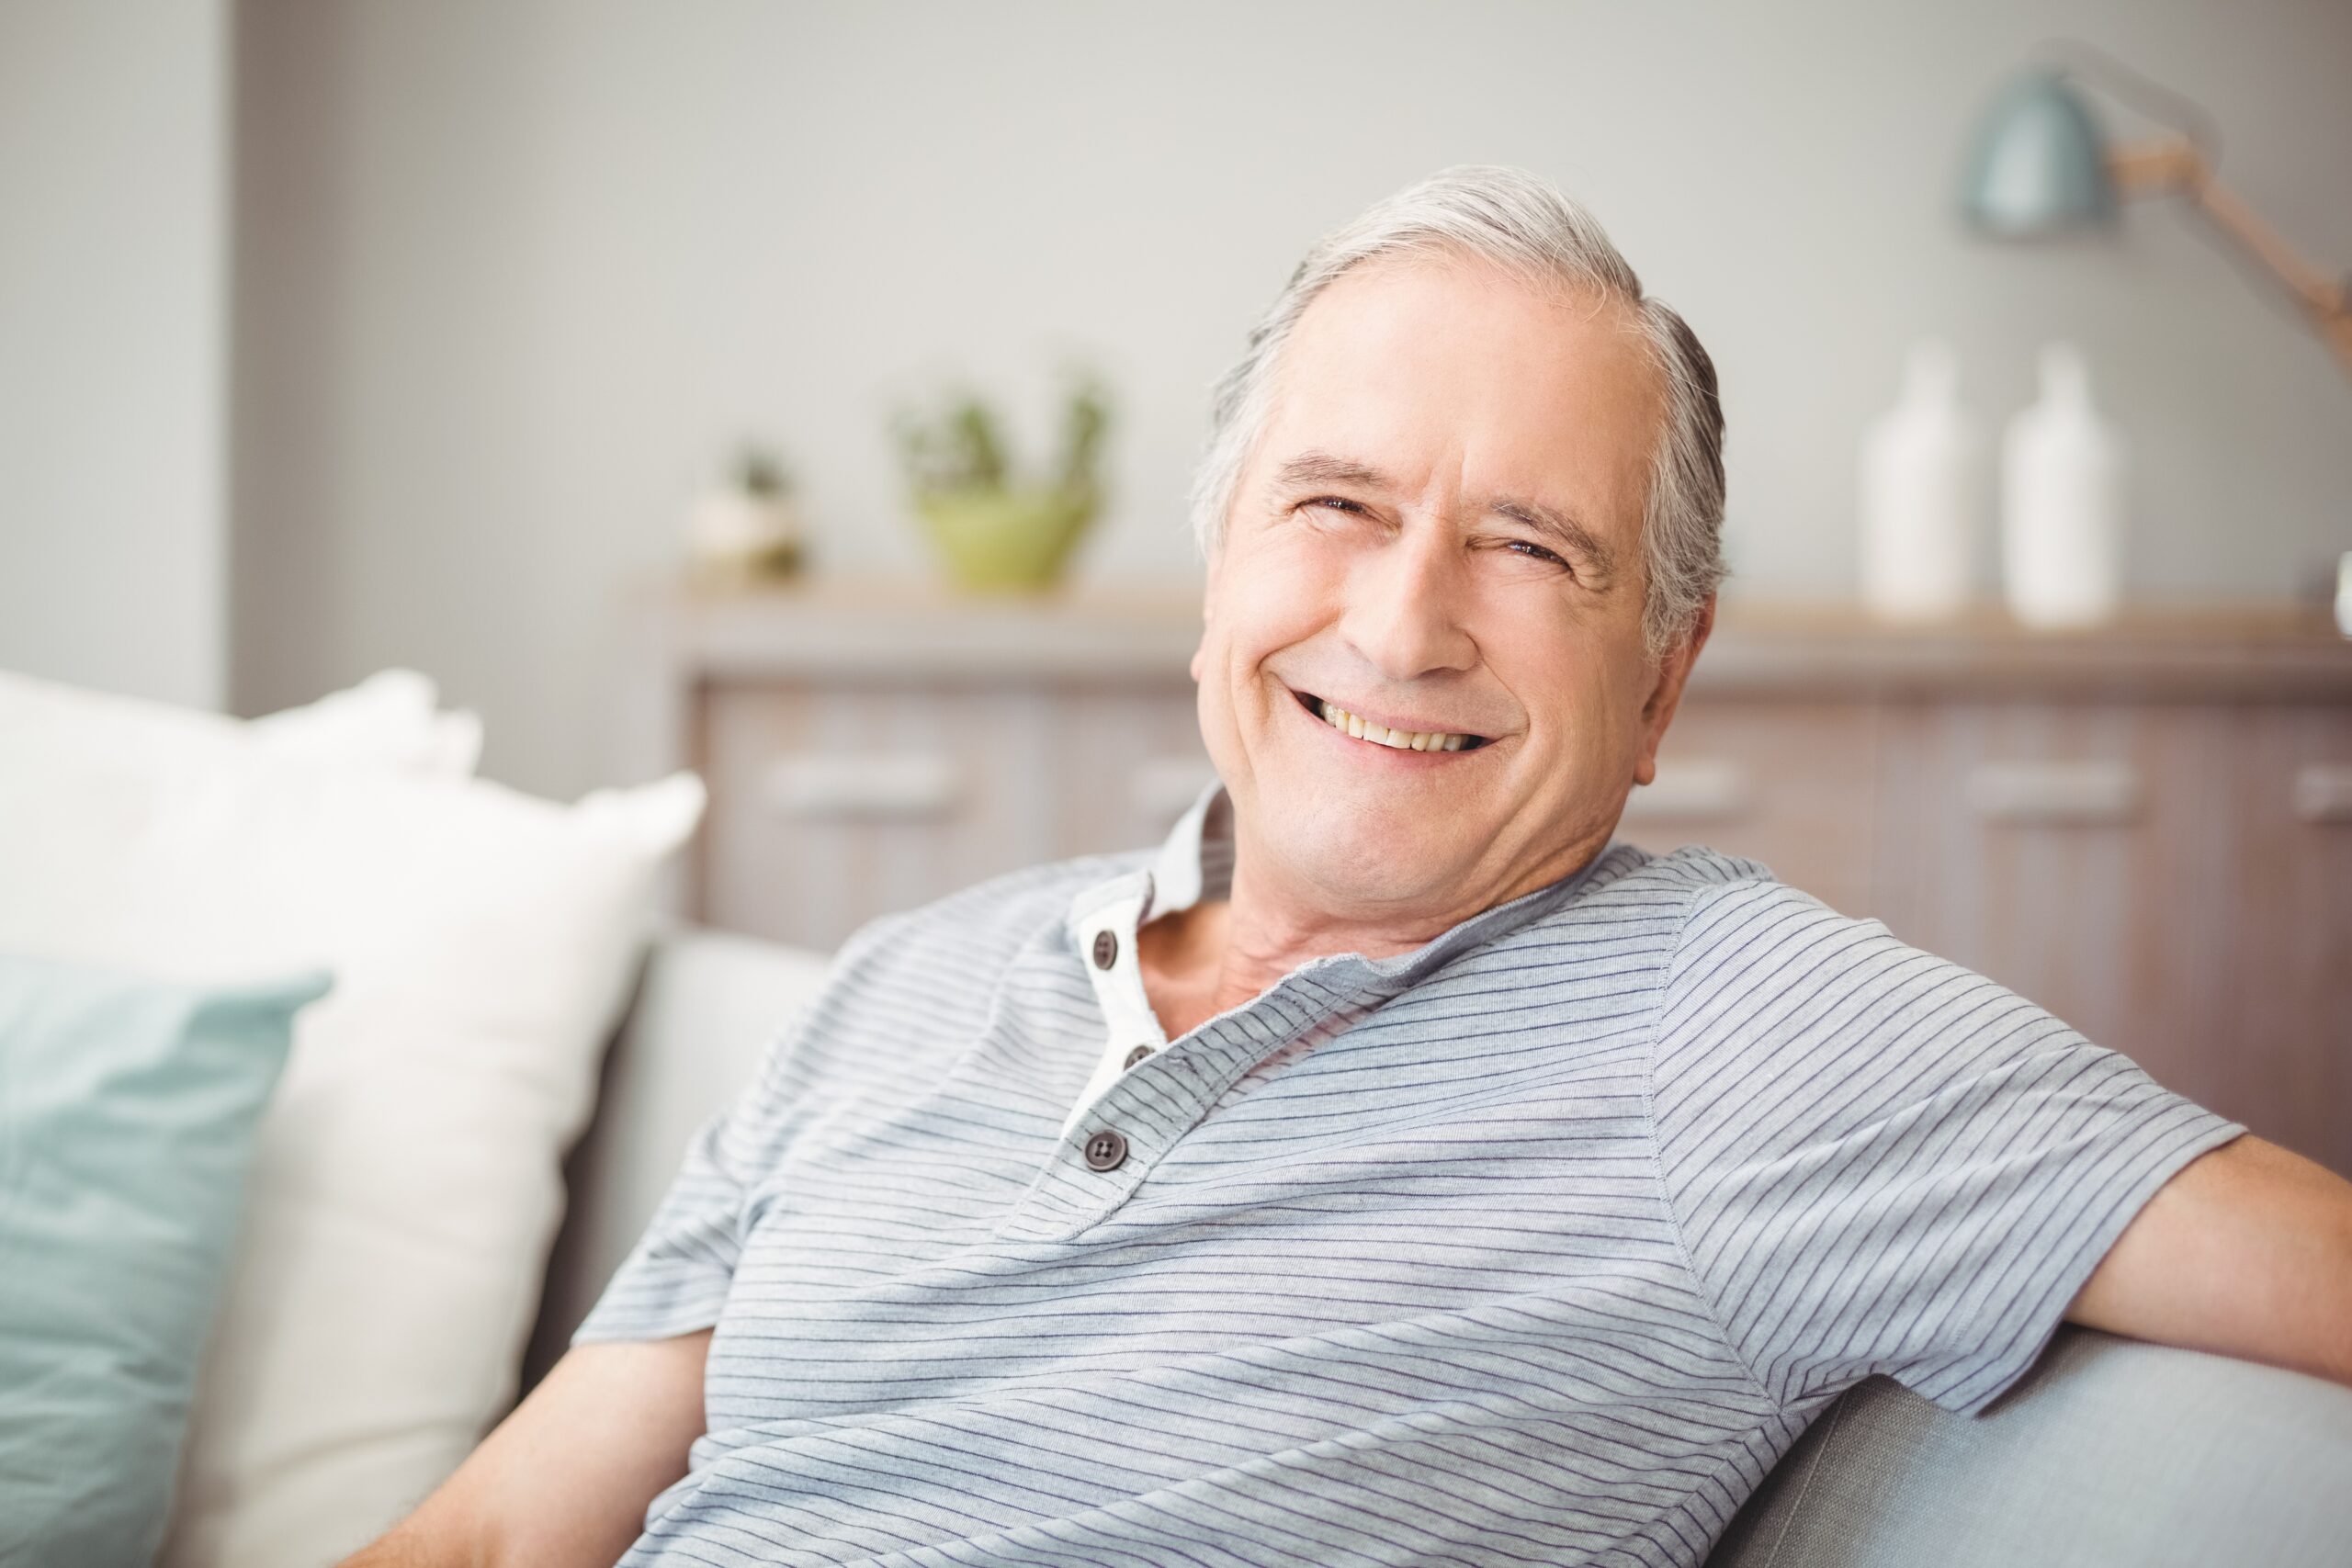 Smiling senior man sitting on couch